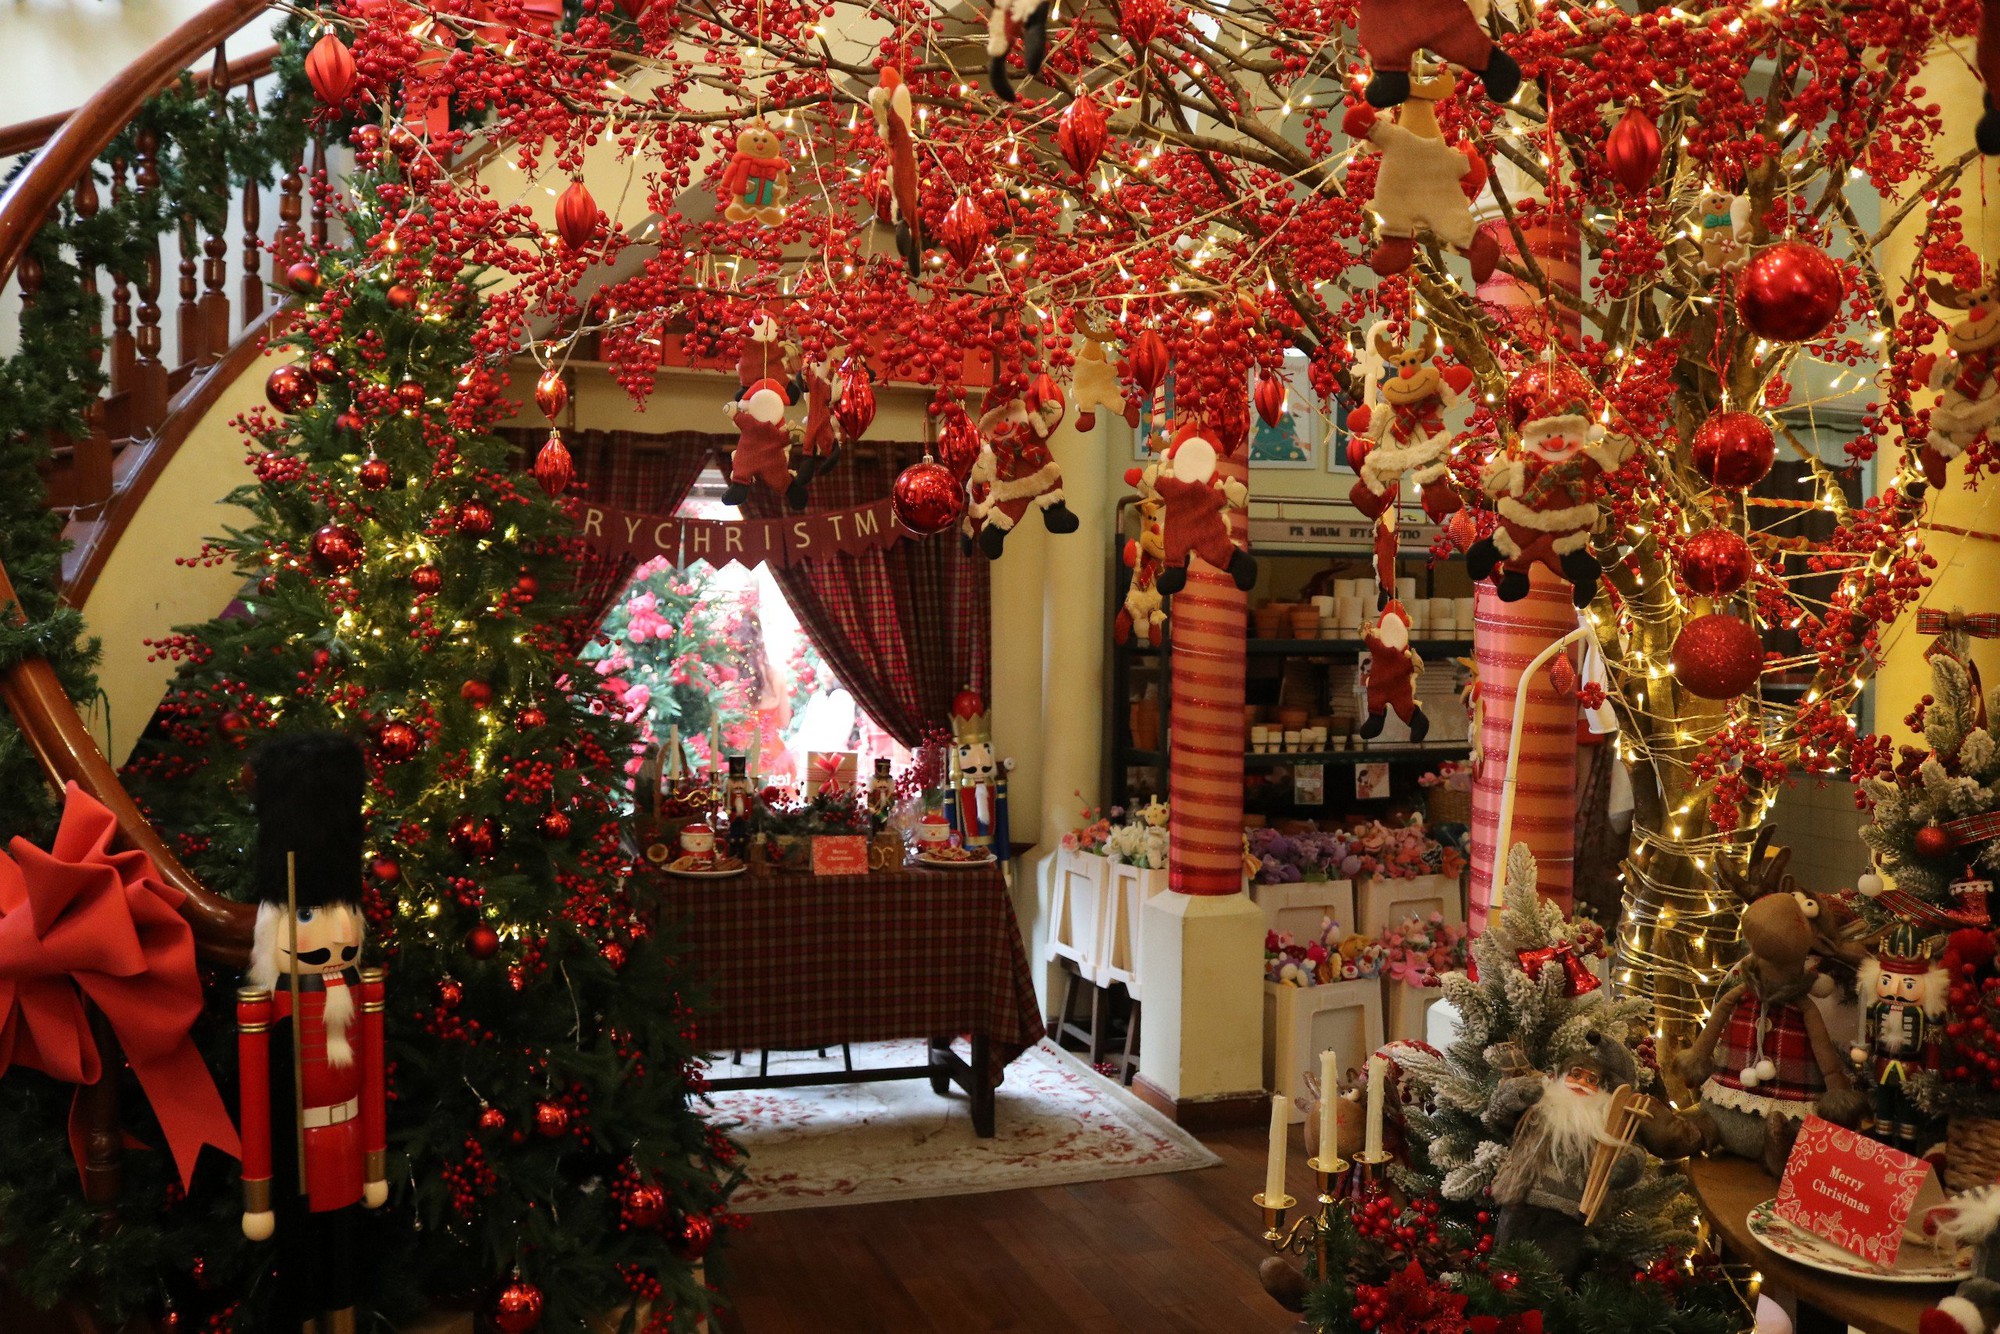 "Check-in" early for Christmas at beautifully decorated cafes in Ho Chi Minh City - Photo 3.